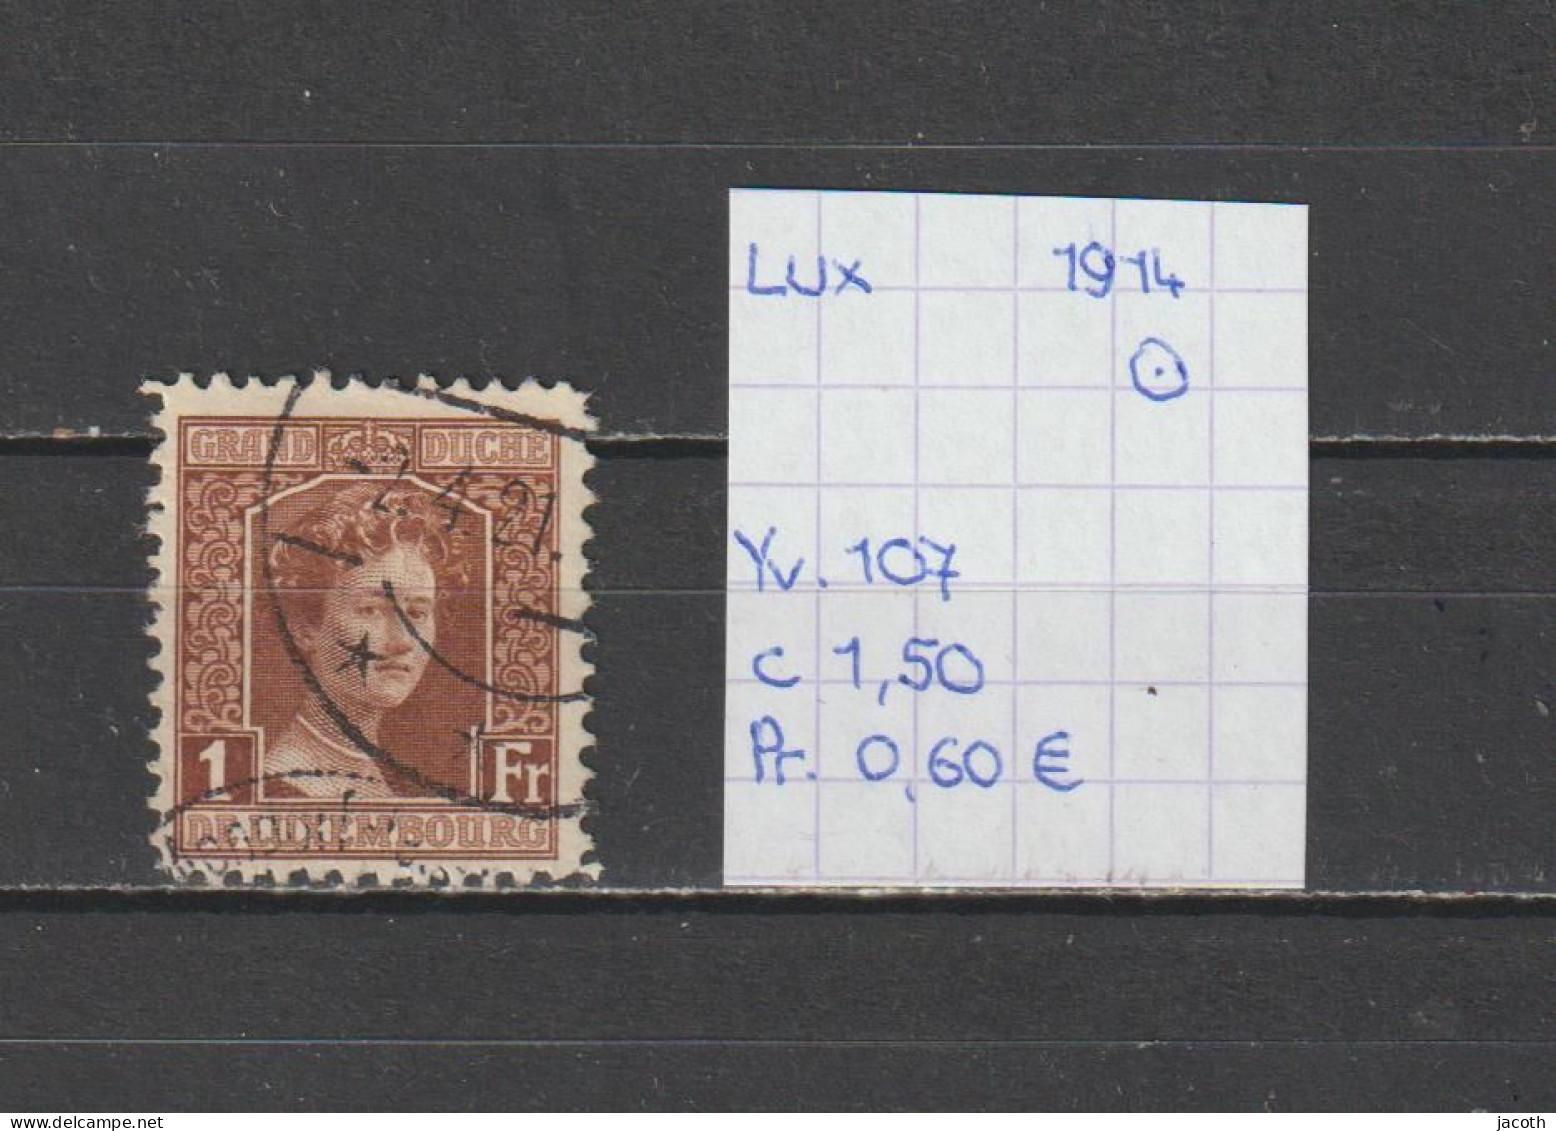 (TJ) Luxembourg 1914 - YT 107 (gest./obl./used) - 1914-24 Marie-Adelaide